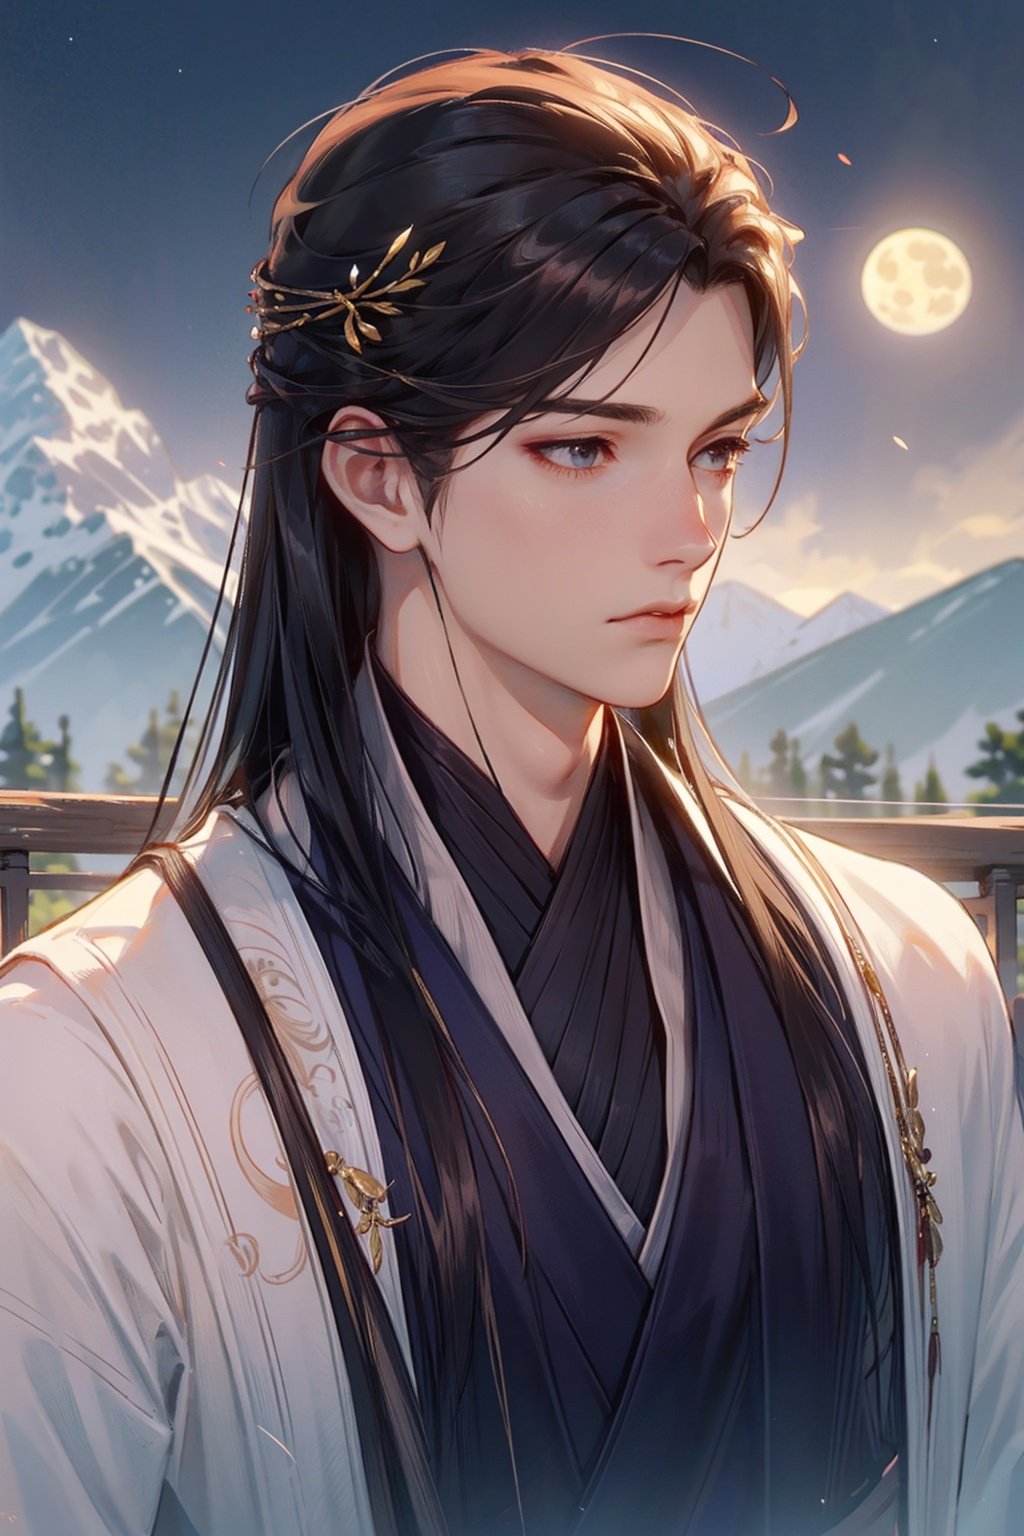 high details, high quality, anatomically correct, textured skin,1 Boy, Male Focus, Long Hair, Solo, Dark Hair, Chinese Costume, Realistic, Blurred, Hairpieces, Outdoors, Polearm, Nature, Looking at Audience, Hand Held,jingxuan,oriental art, wide angle lens, full bright moon in the Sky, Mountains in the distance, rivers in the vicinity, chrysanthemums, osmanthus,